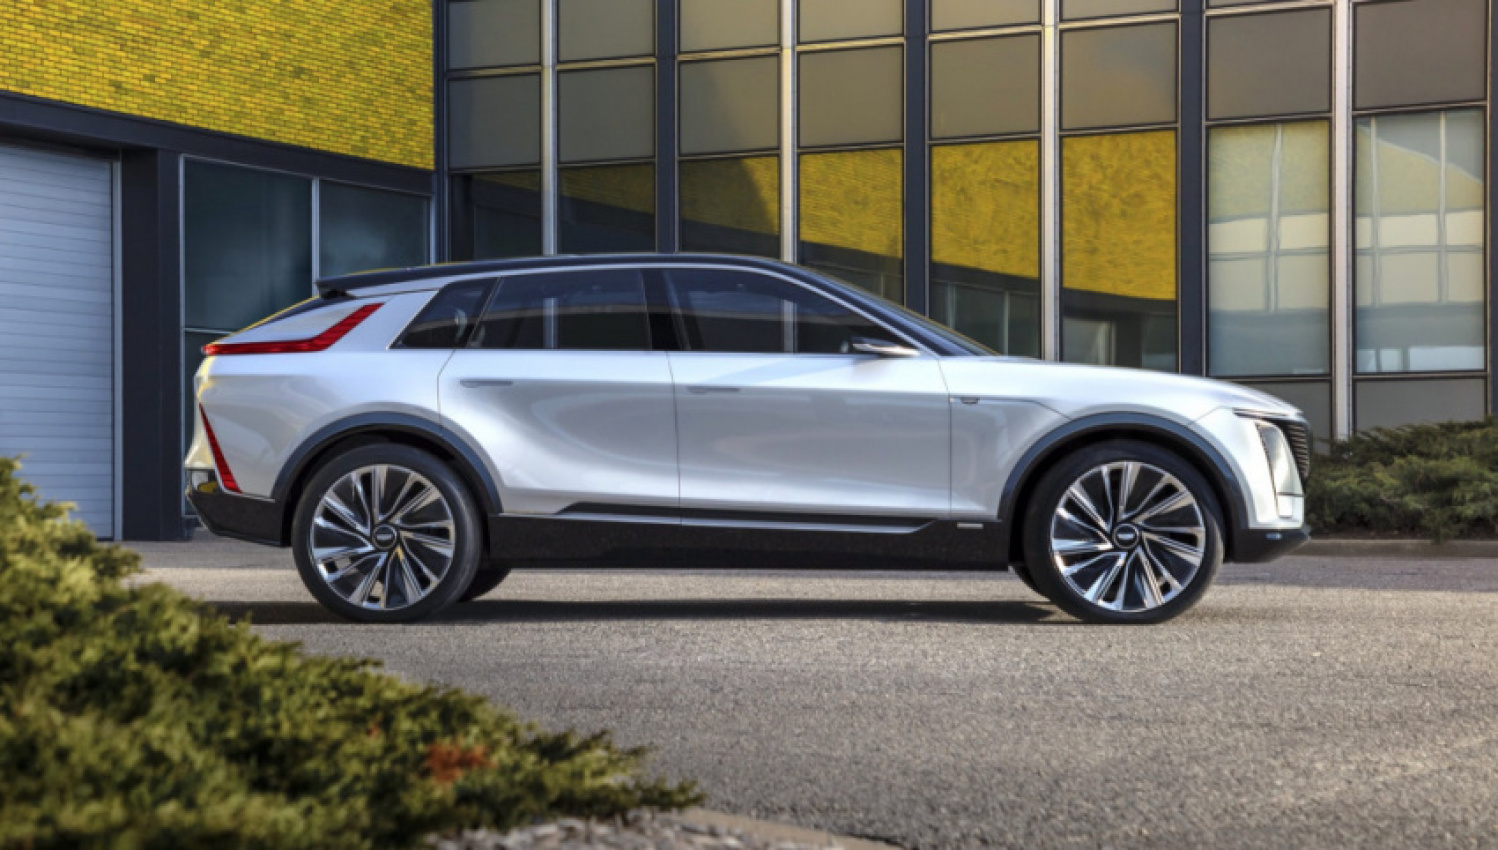 autos, cadillac, cars, tesla, volvo, news, the week in reverse, volvo plug-in hybrids, cadillac lyriq production, mach-e demand, tesla prices up again, the week in reverse